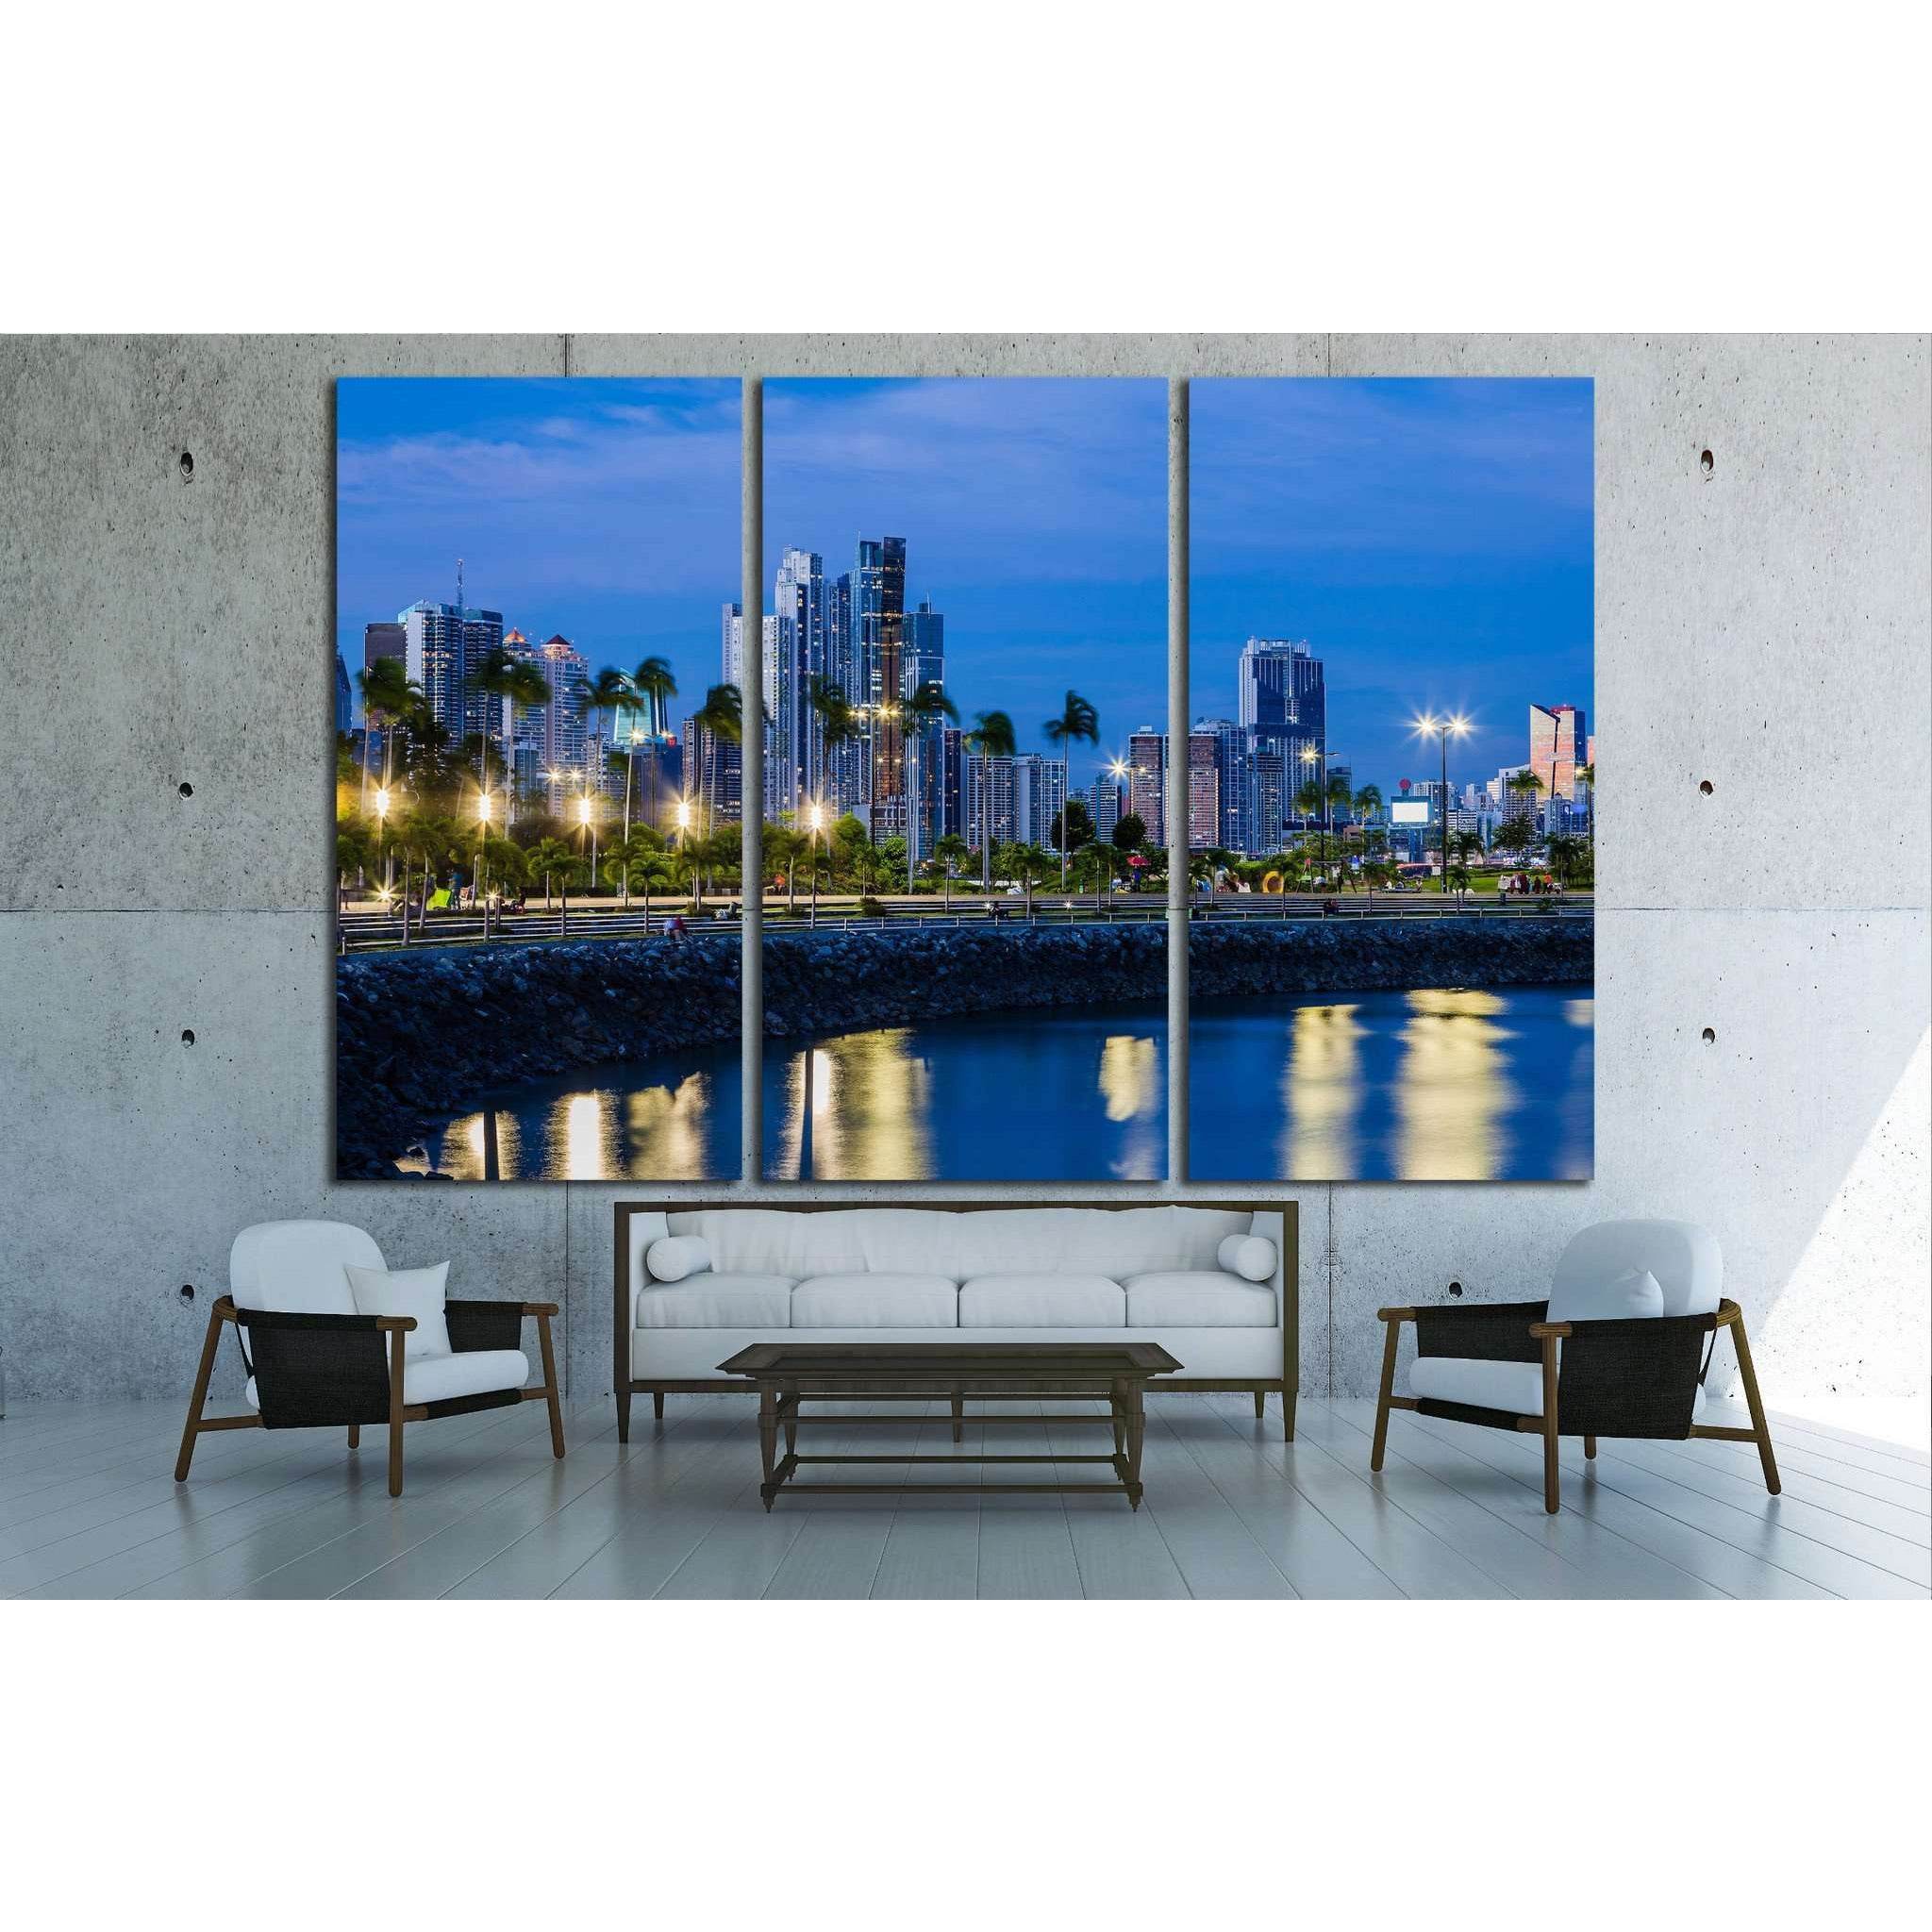 Skyline of Panama City at blue hour №1559 Ready to Hang Canvas Print